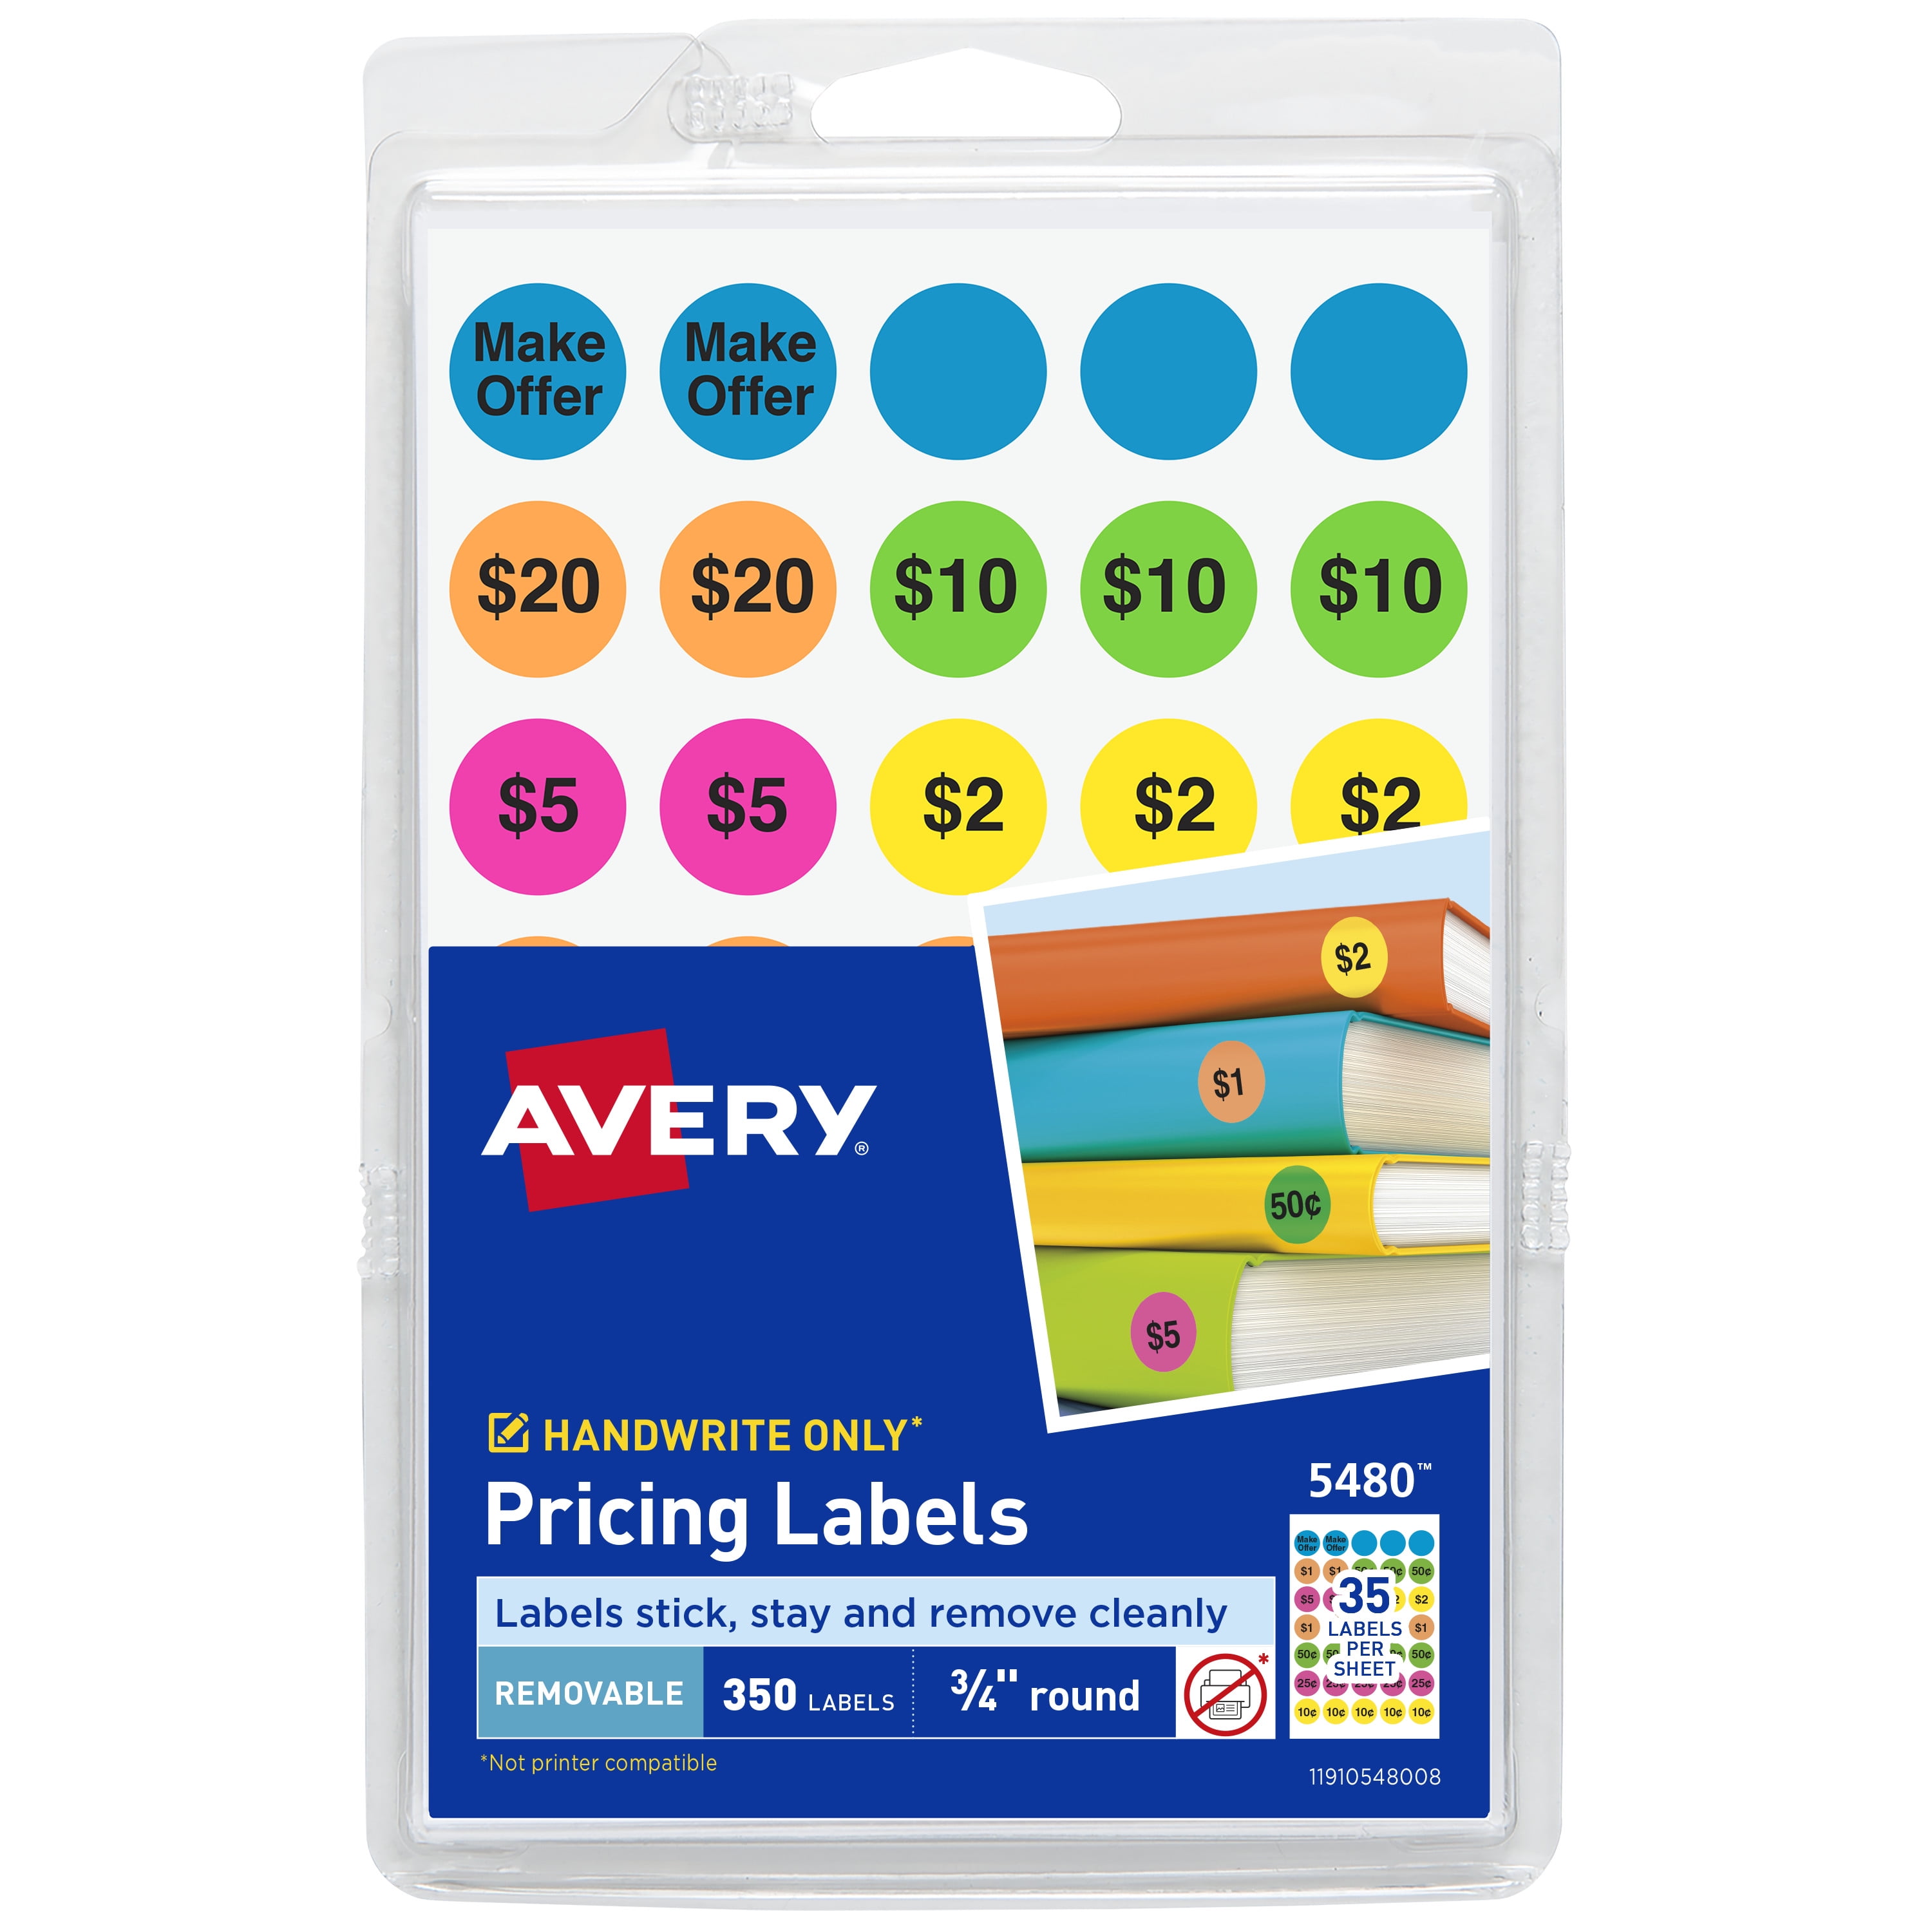 GILLRAJ 2240pcs Garage Sale Price Stickers 3/4 Size Unique Fluorescent  Colors 40 Sheets of 4 Bright Colored Preprinted Dollar Pricing Labels for  Yard